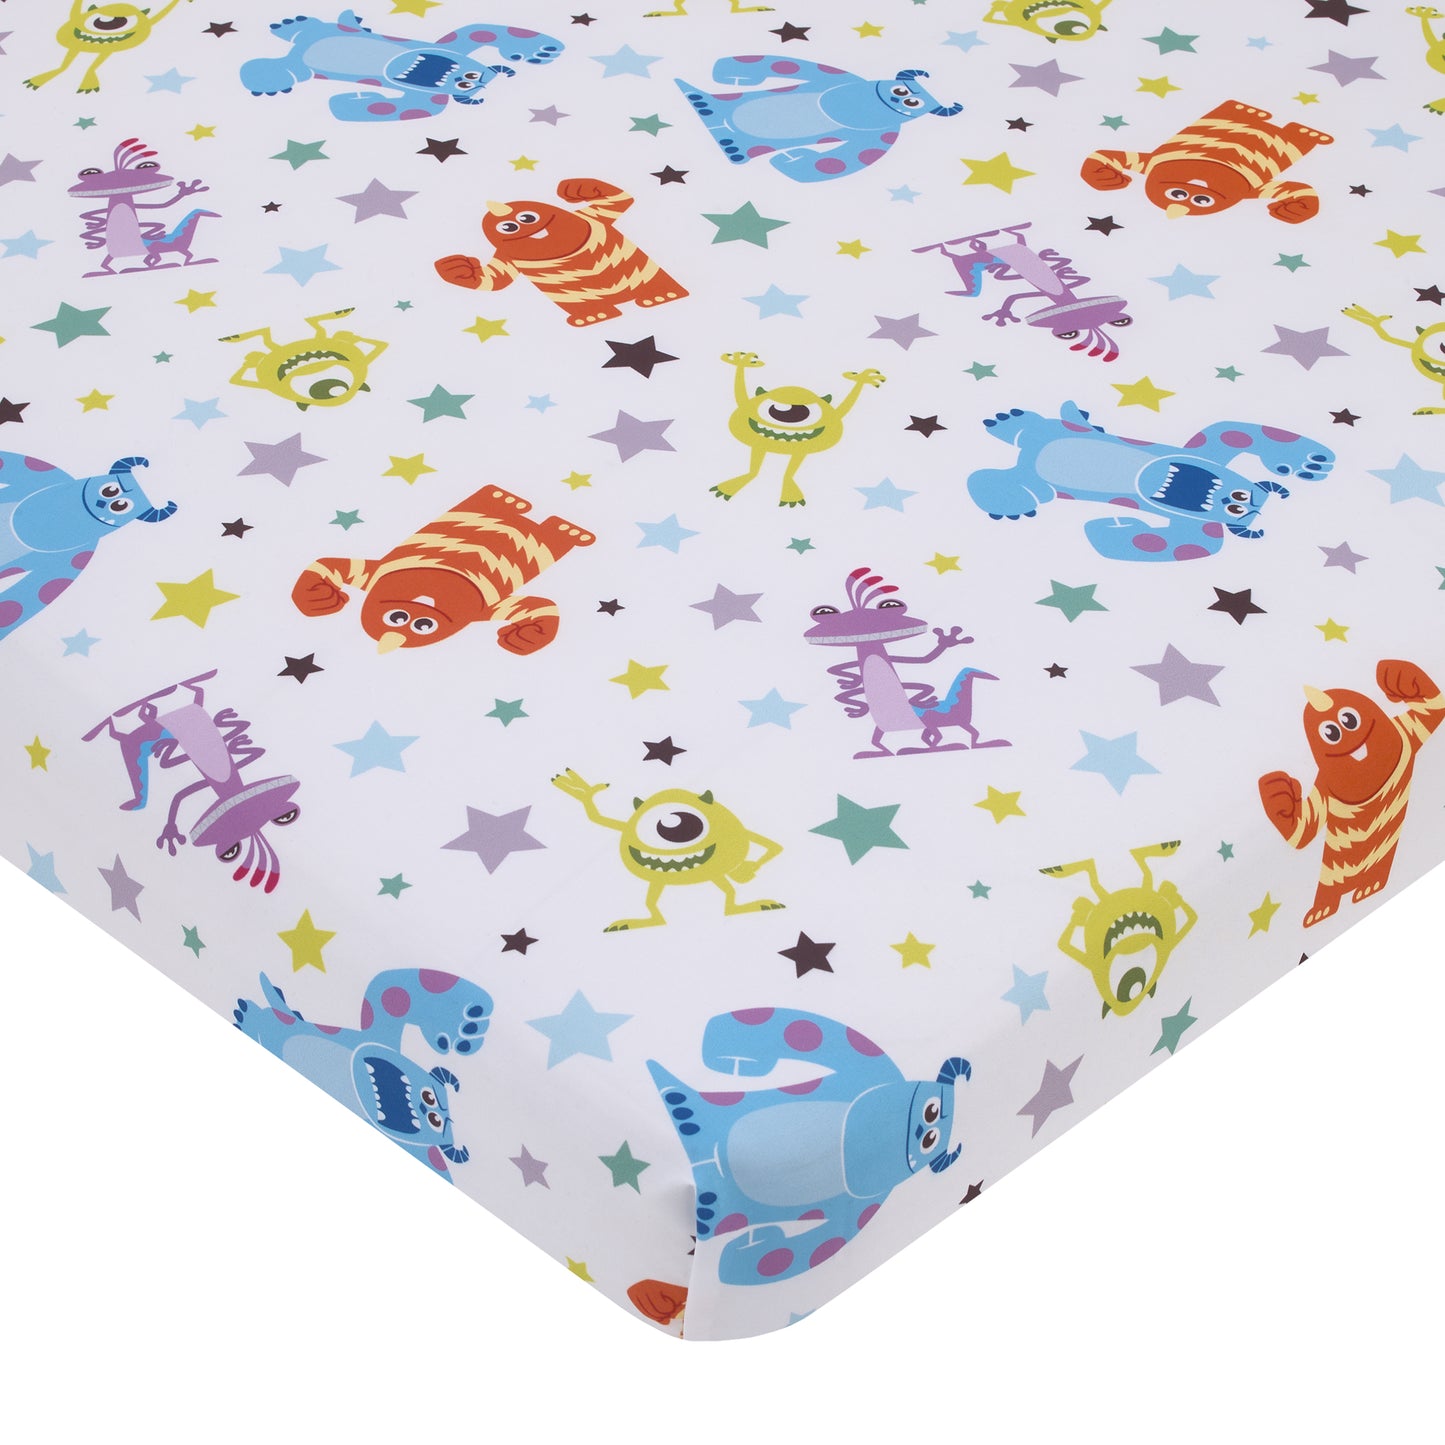 Disney Monsters Inc. Blue, Green, Orange and White, Sully and Mike Super Soft Nursery Fitted Mini Crib Sheet